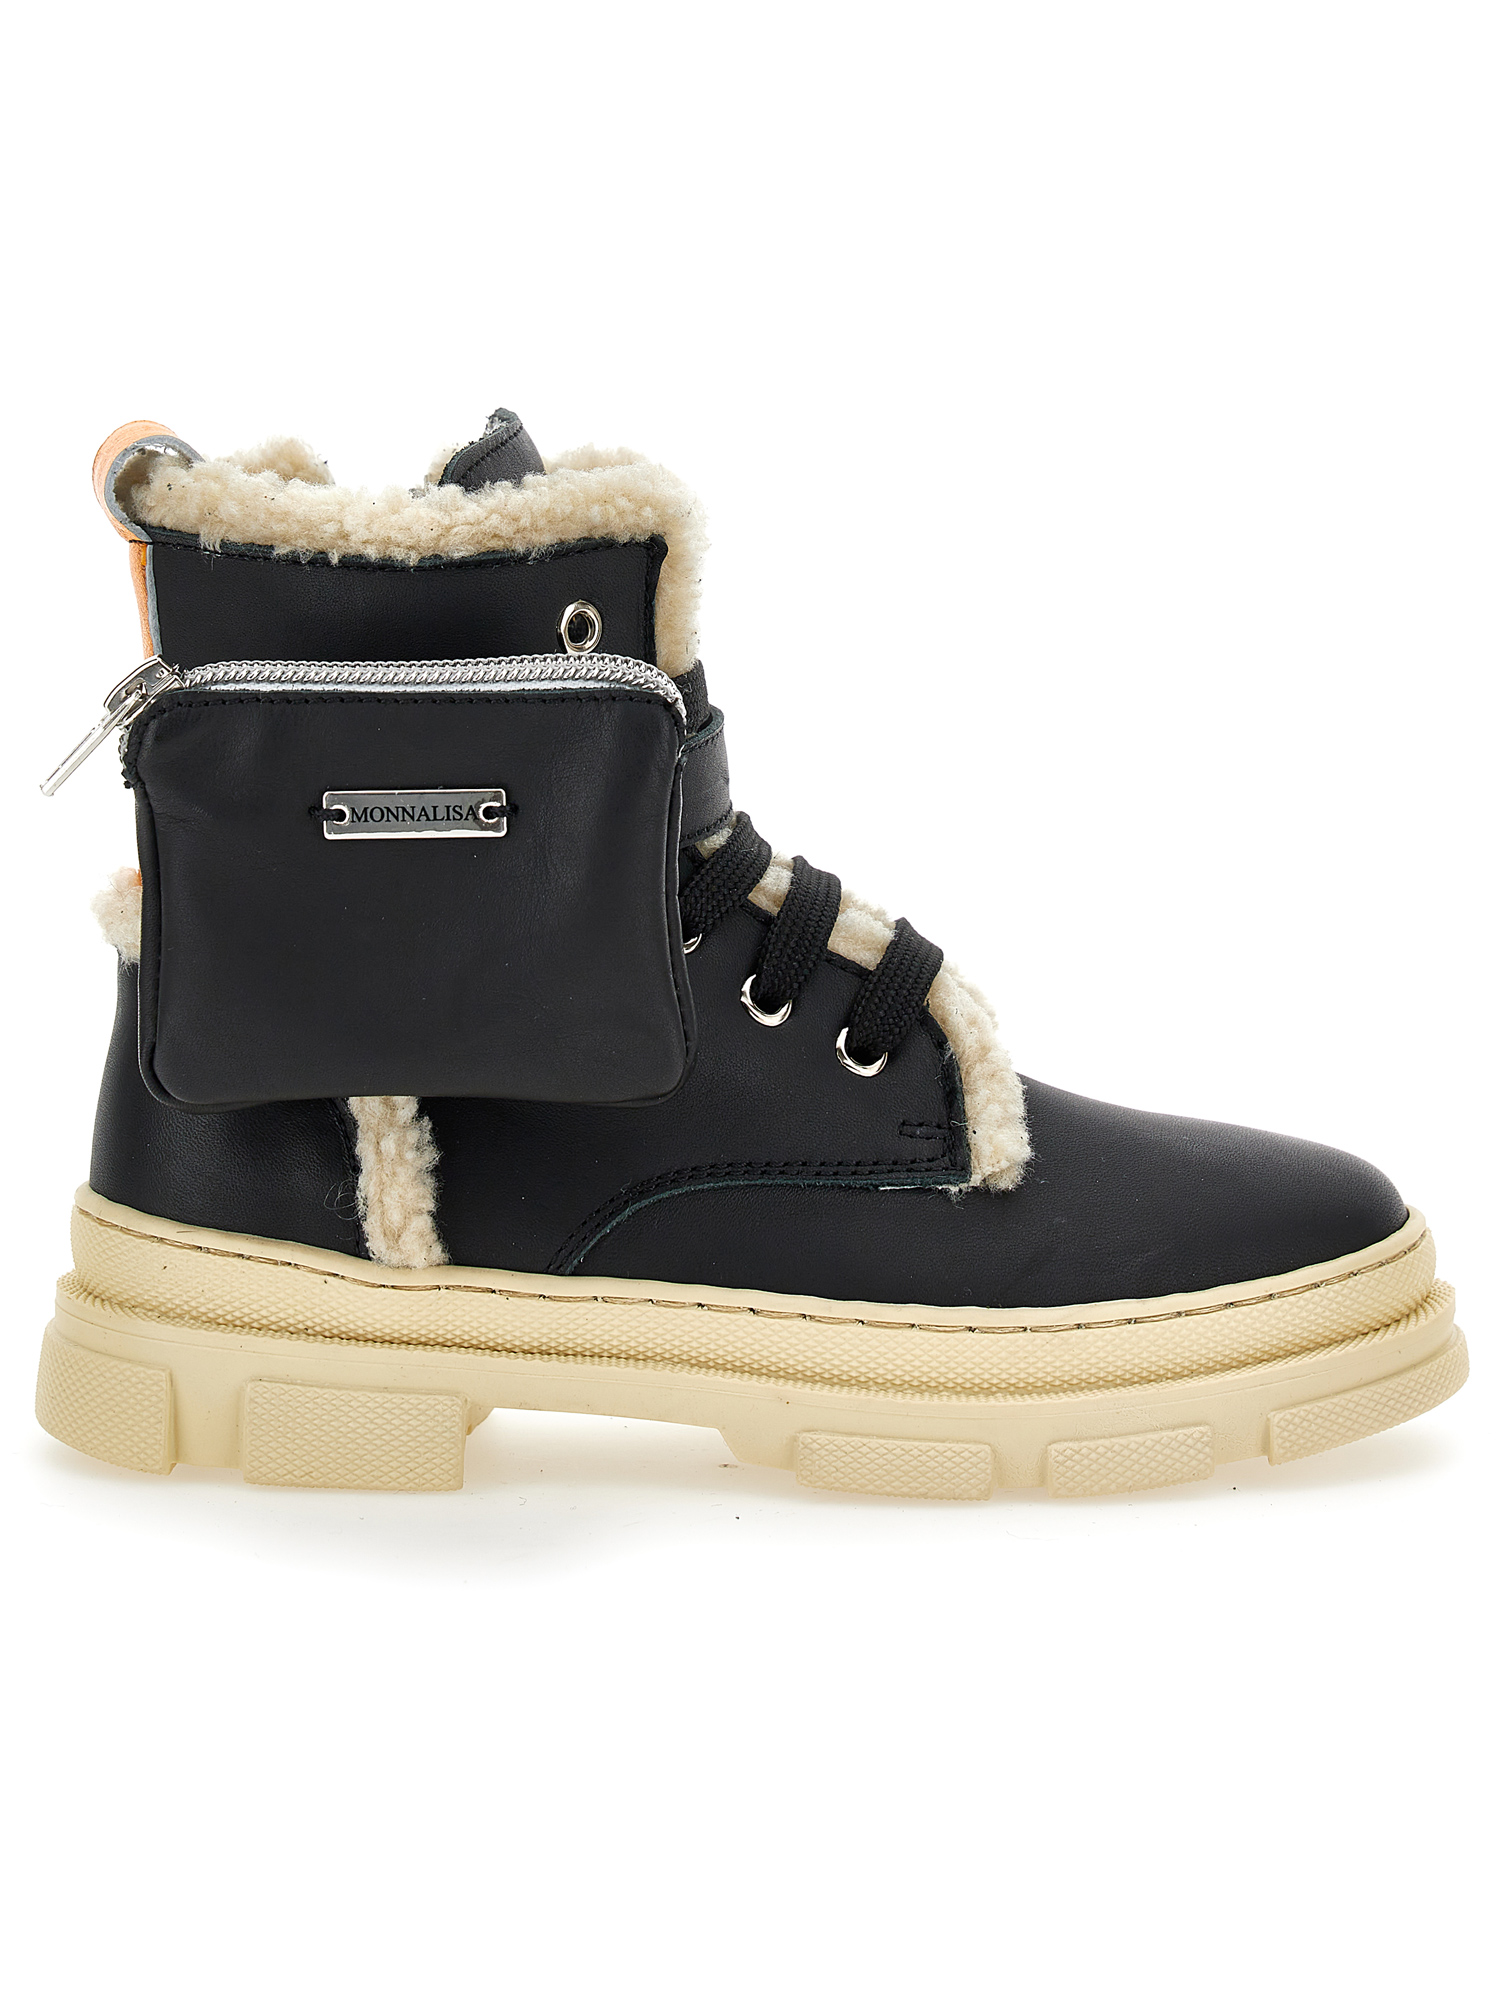 Monnalisa Leather Boots With Sheepskin Inner In Black